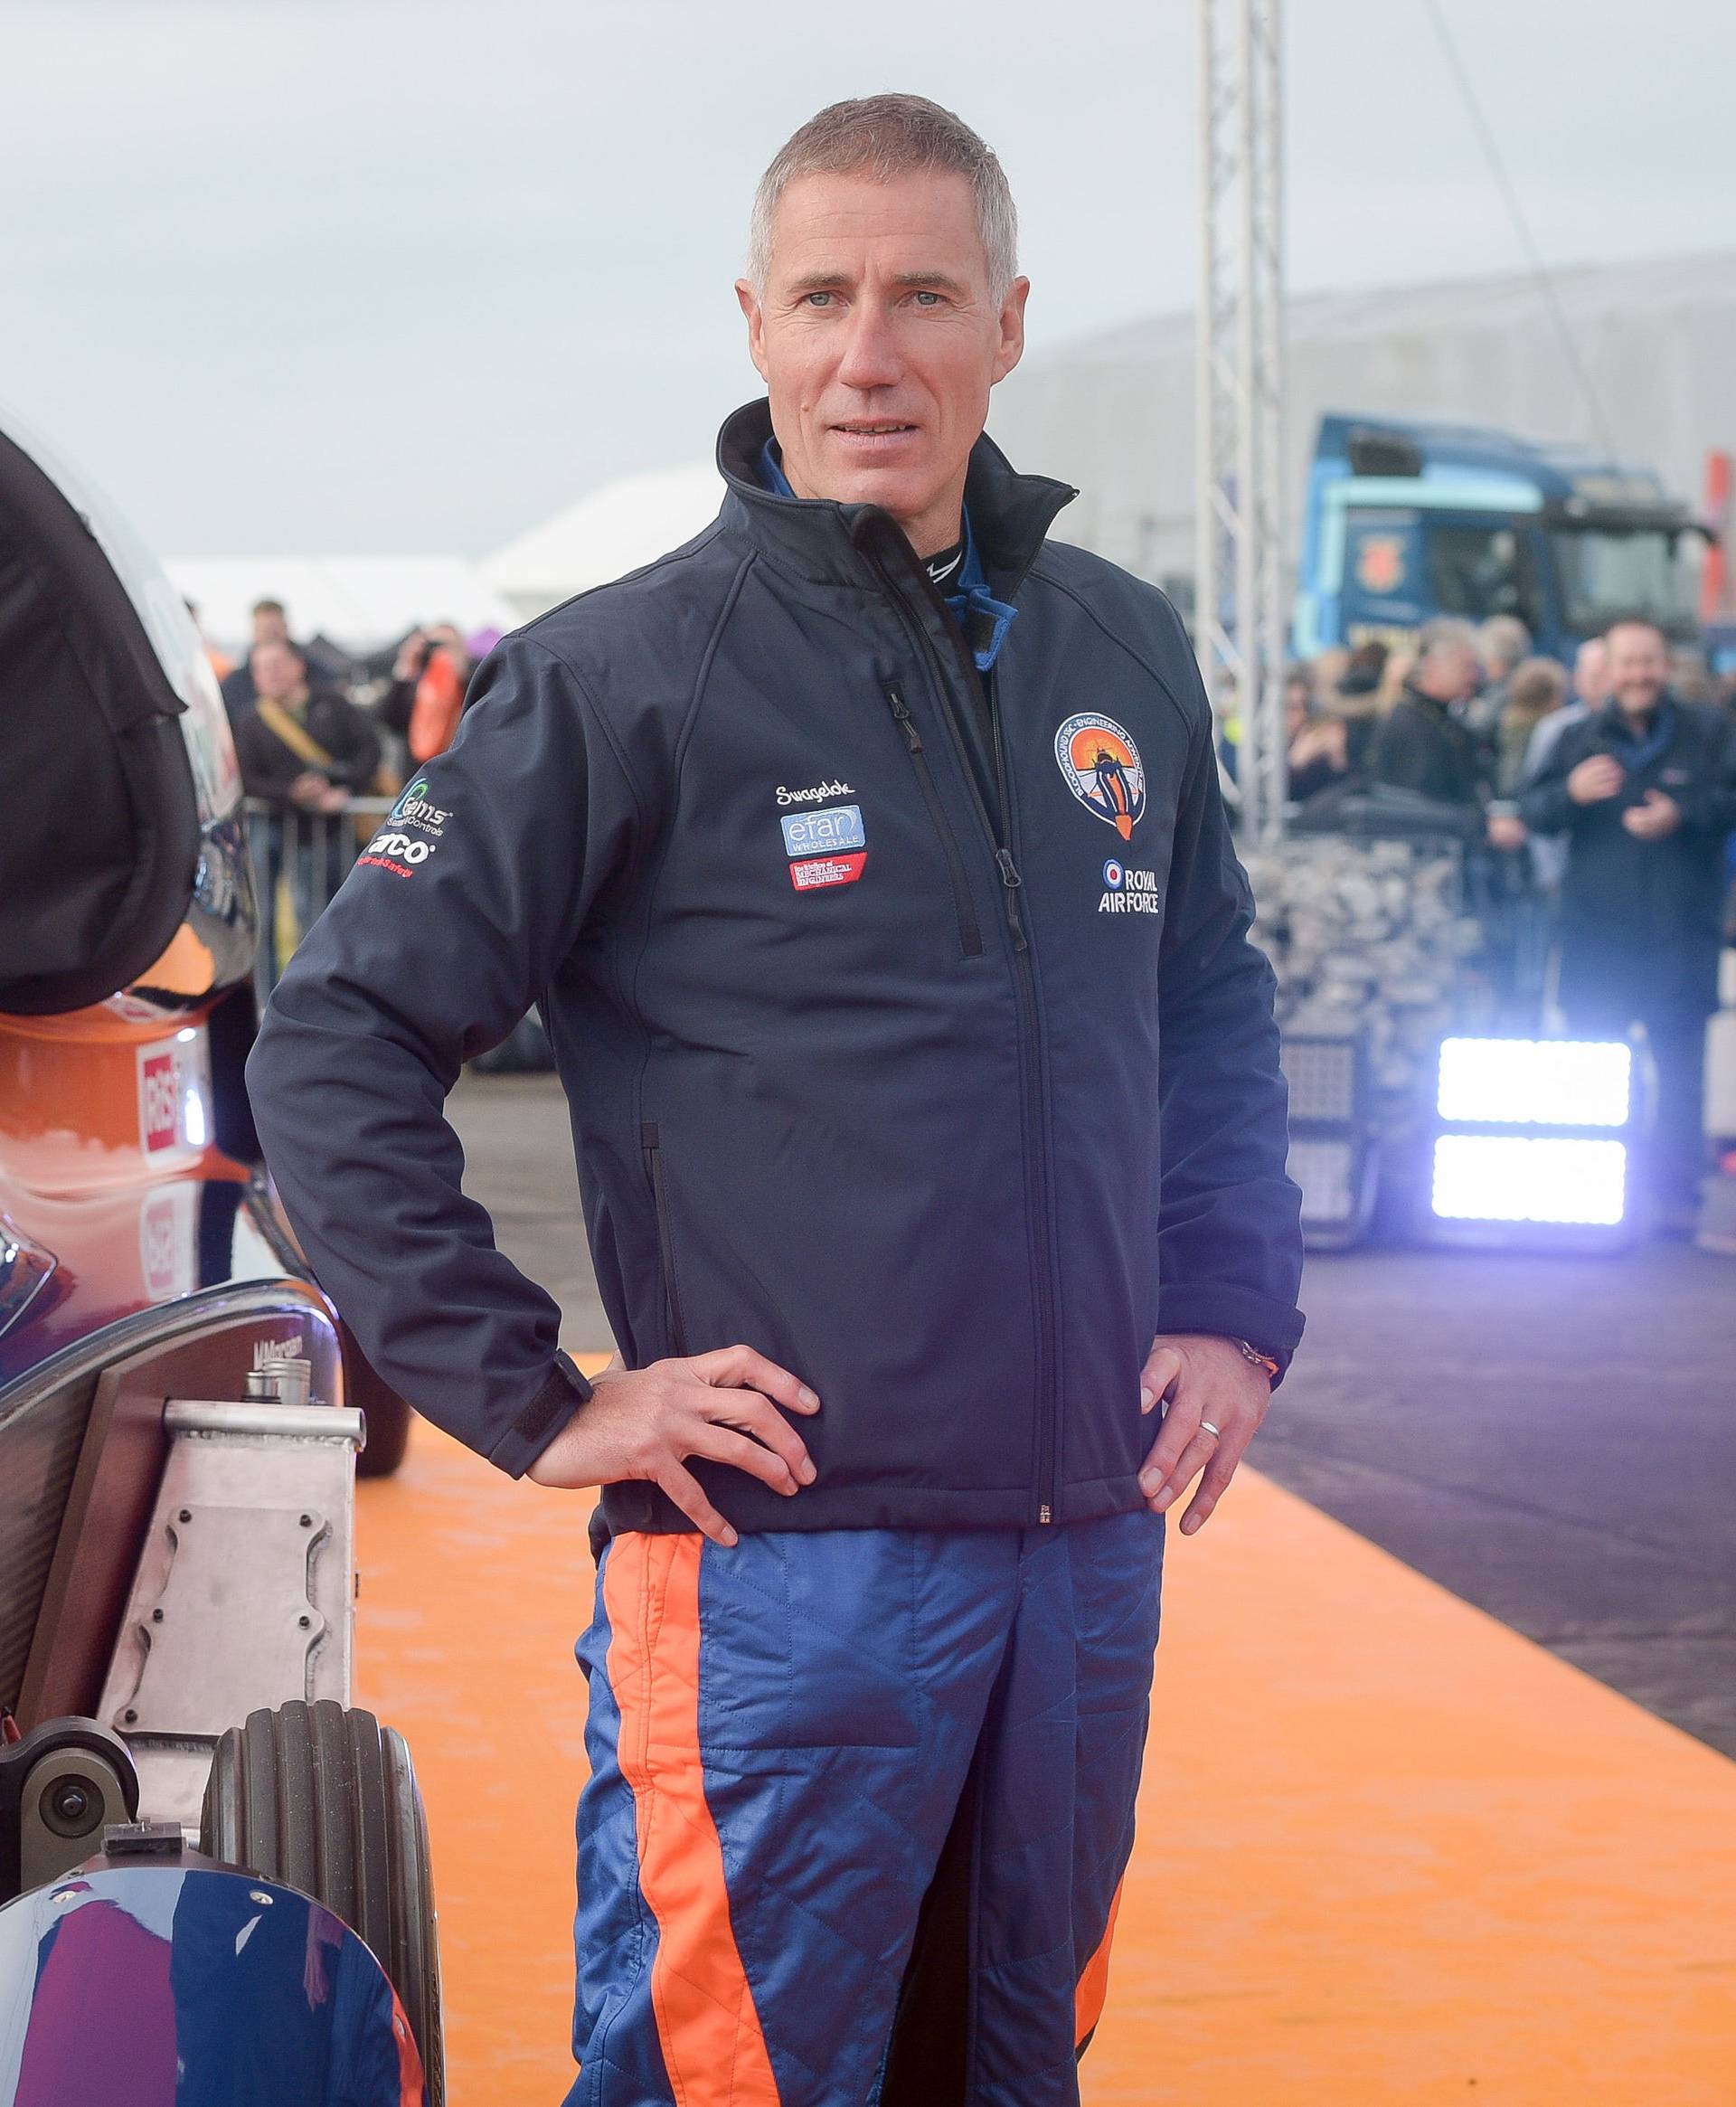 Bloodhound 1,000mph supersonic racing car